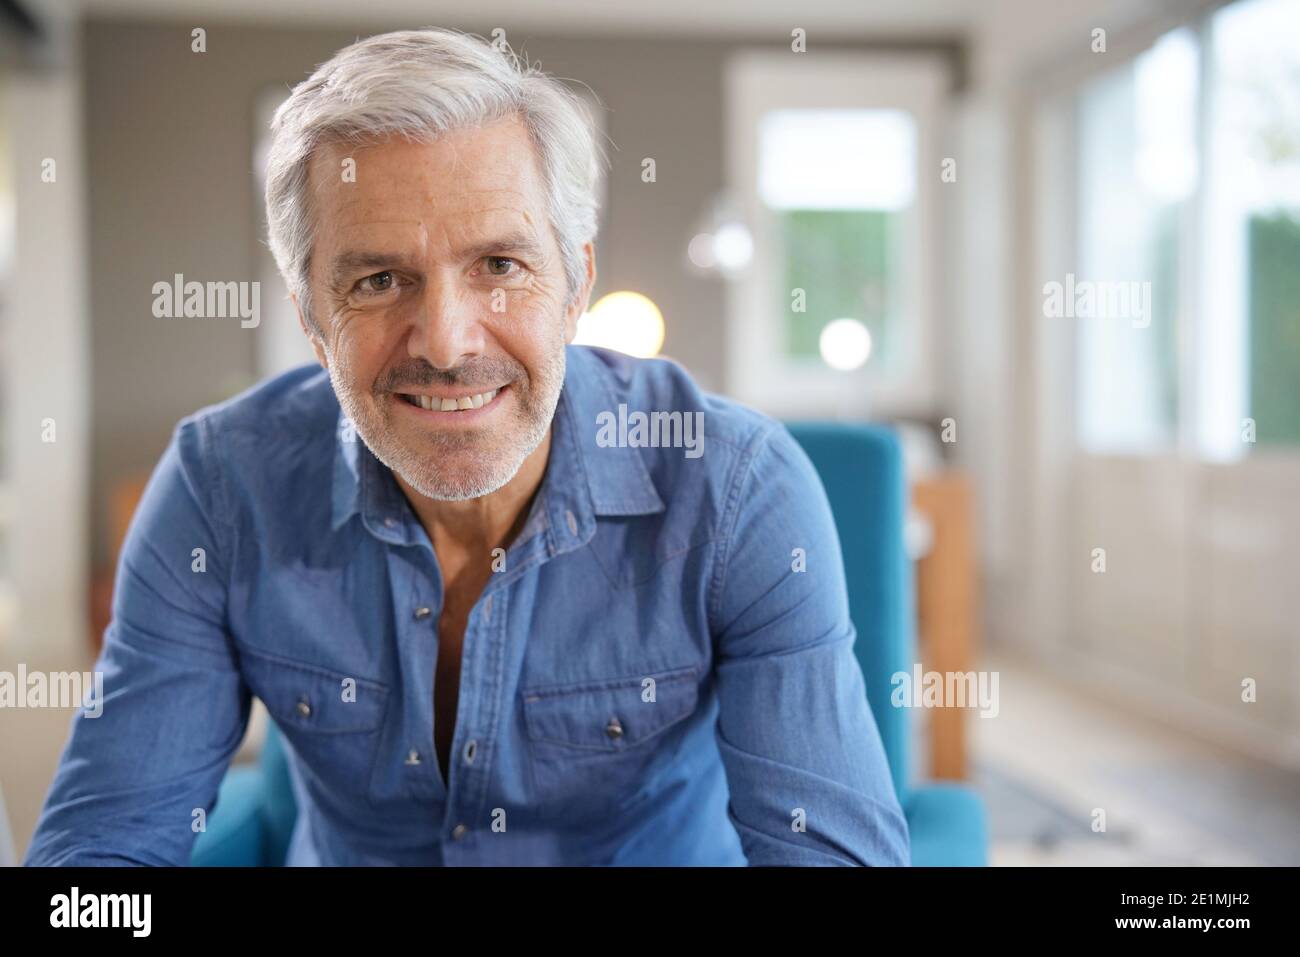 Portrait Of 60 Year Old Man With Grey Hair And Blue Shirt Looking At